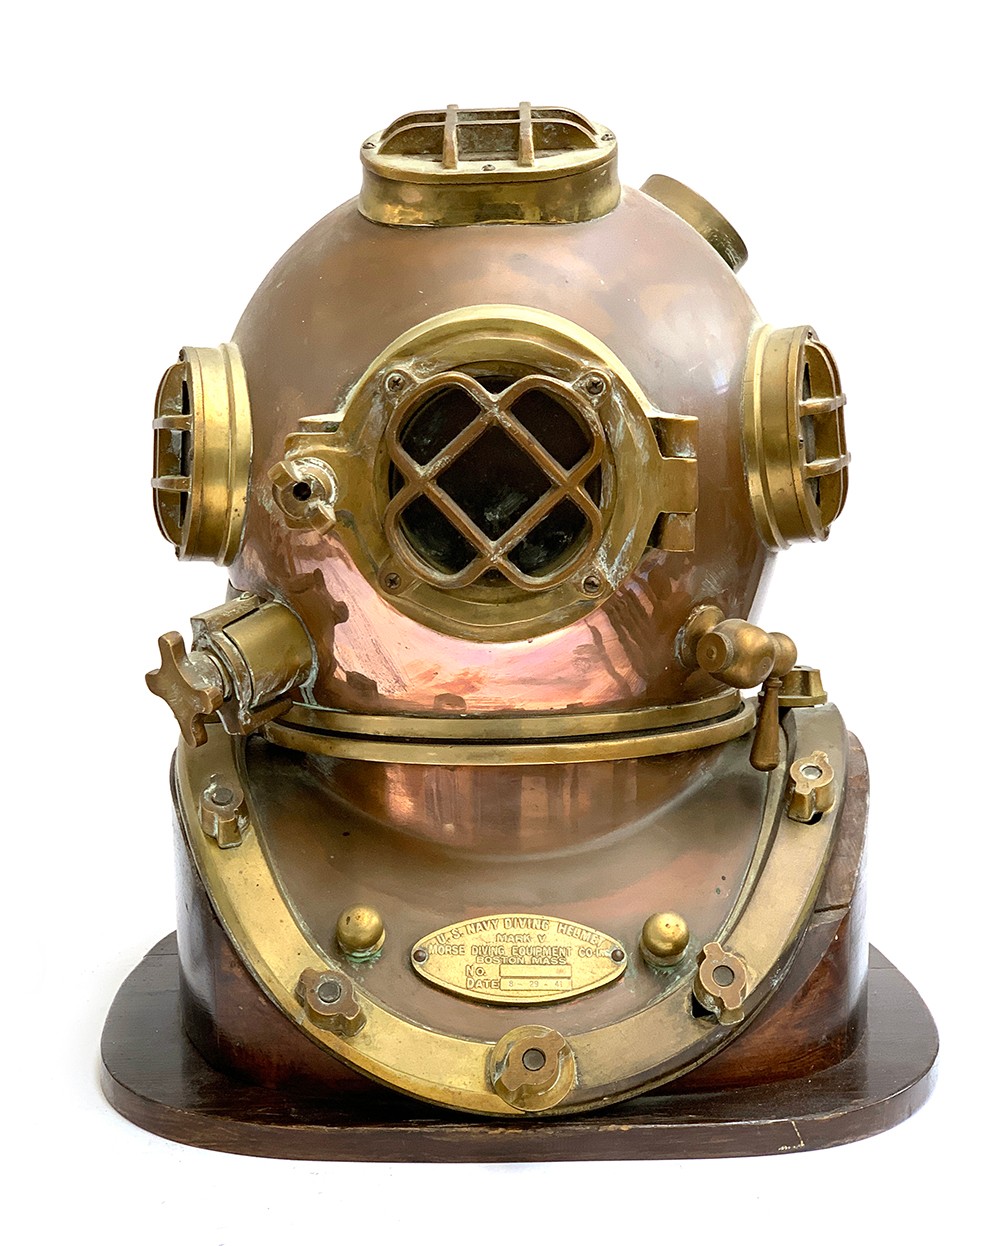 A Brass and copper US navy diving helmet, bears a label "U.S.Navy Diving Helmet Mark V, Morse Diving